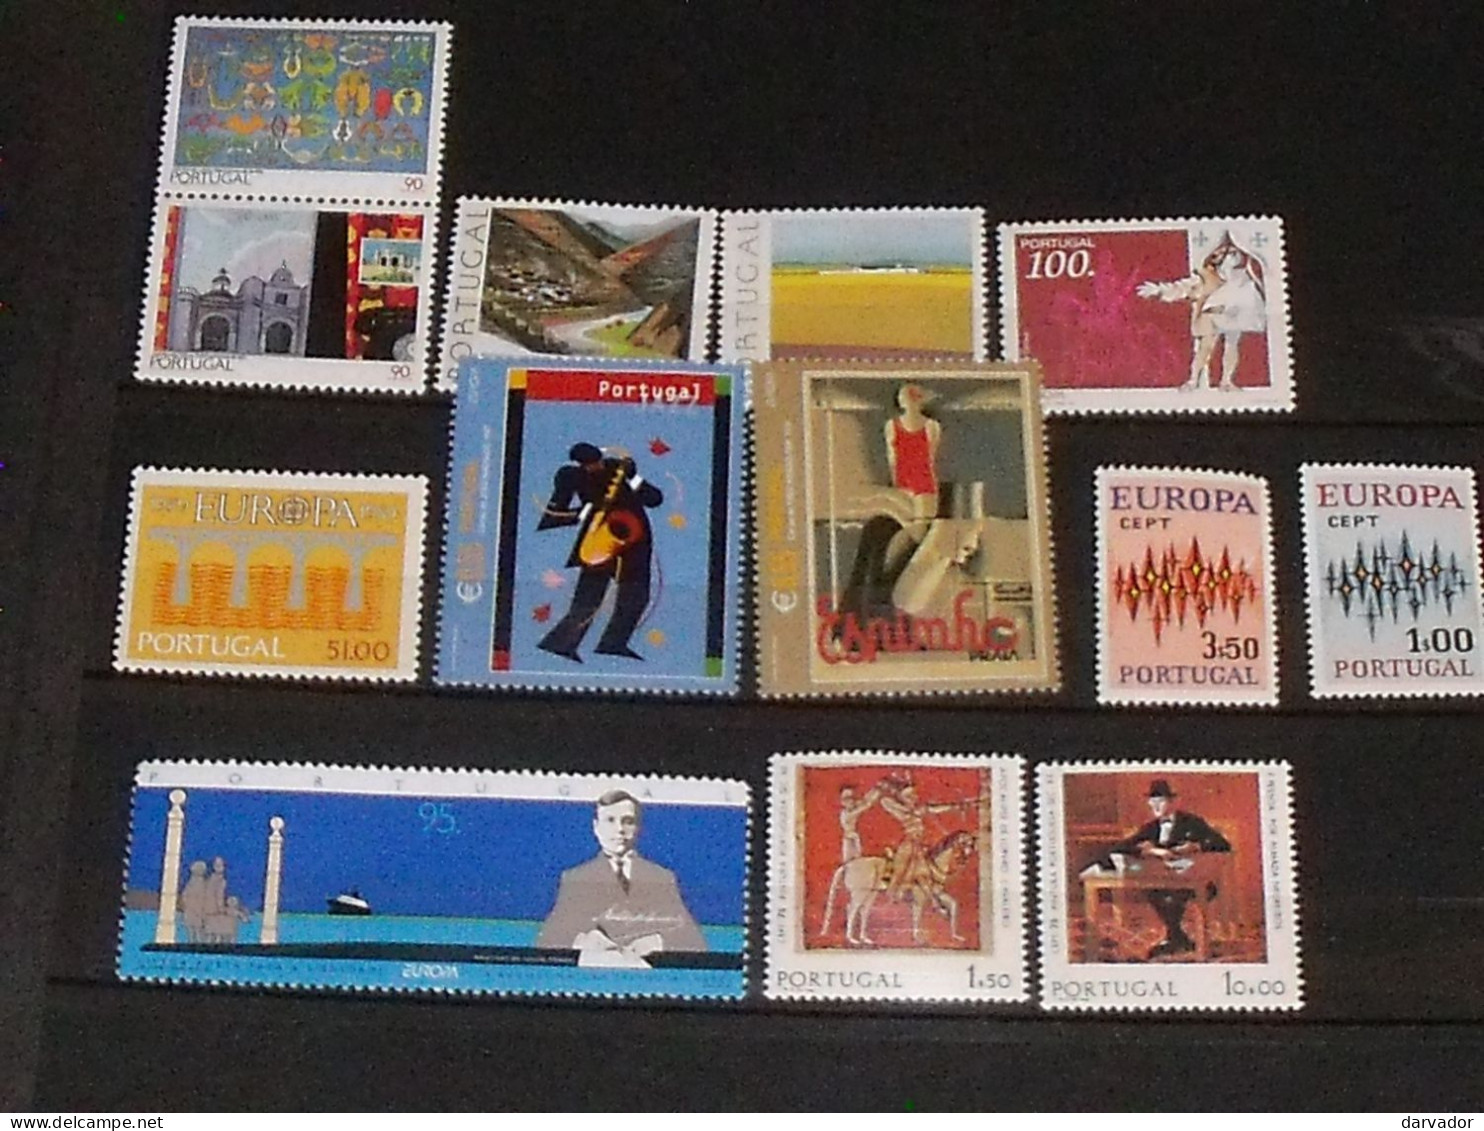 VIDE 2024 / PORTUGAL  : divers timbres tous neuf ** dont EUROPA / MNH /   TTB